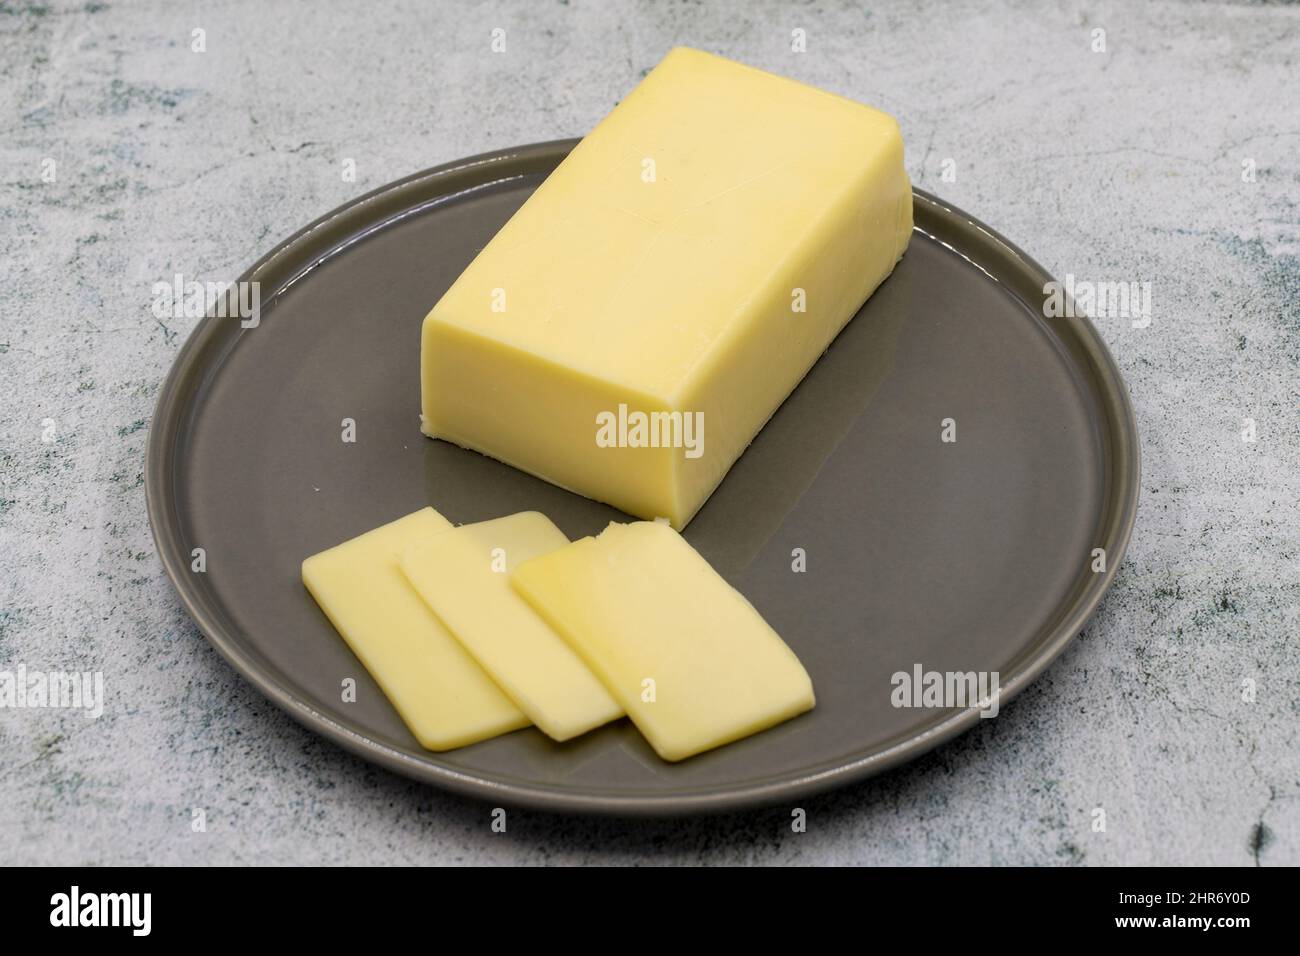 Kashar cheese or kashkaval cheese on stone background. Sliced Cheddar Cheese Stock Photo